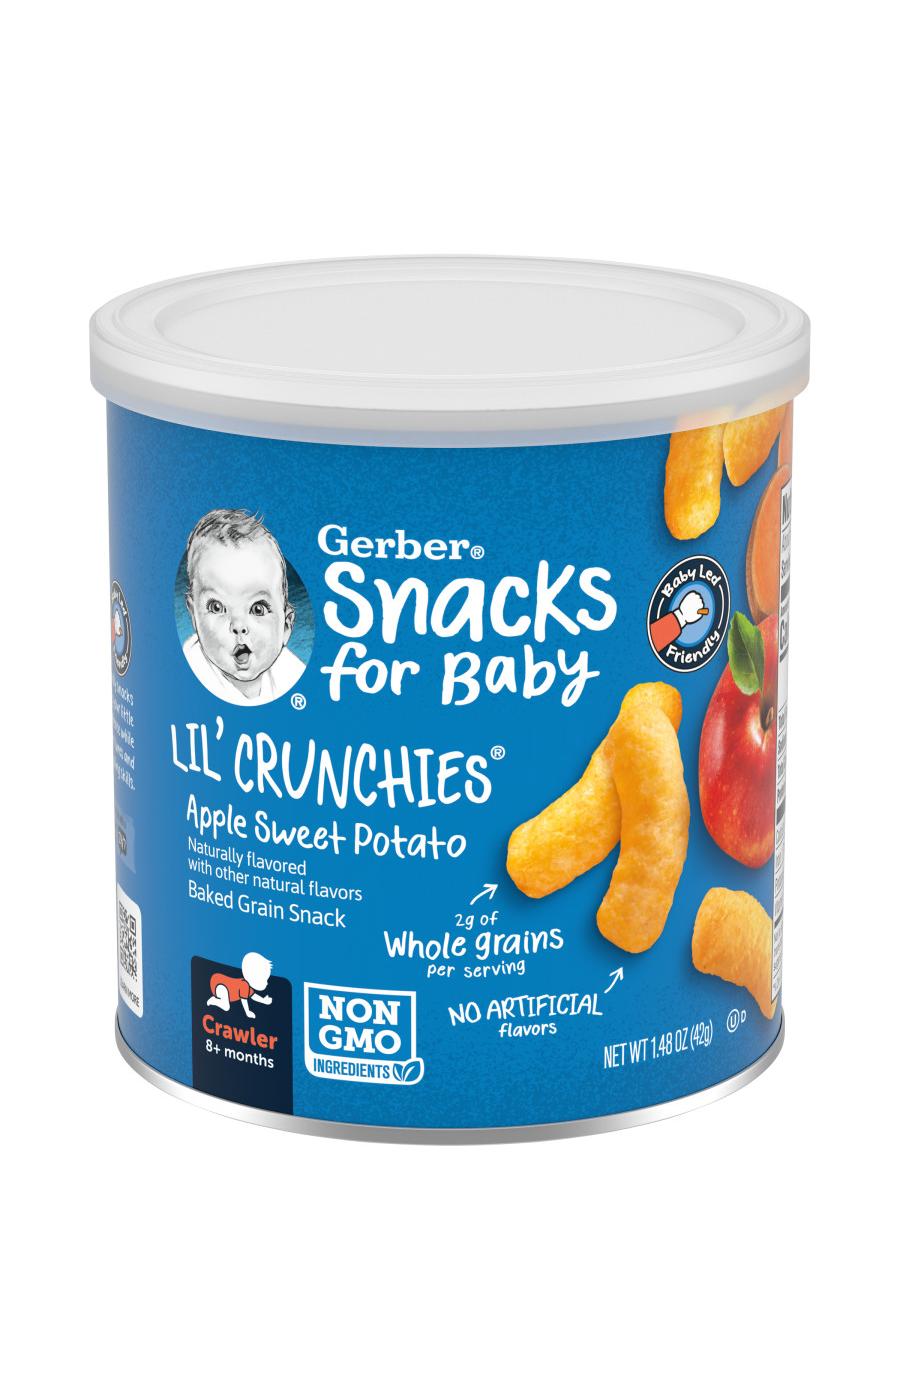 Gerber Snacks for Baby Lil Crunchies - Apple Sweet Potato; image 1 of 8